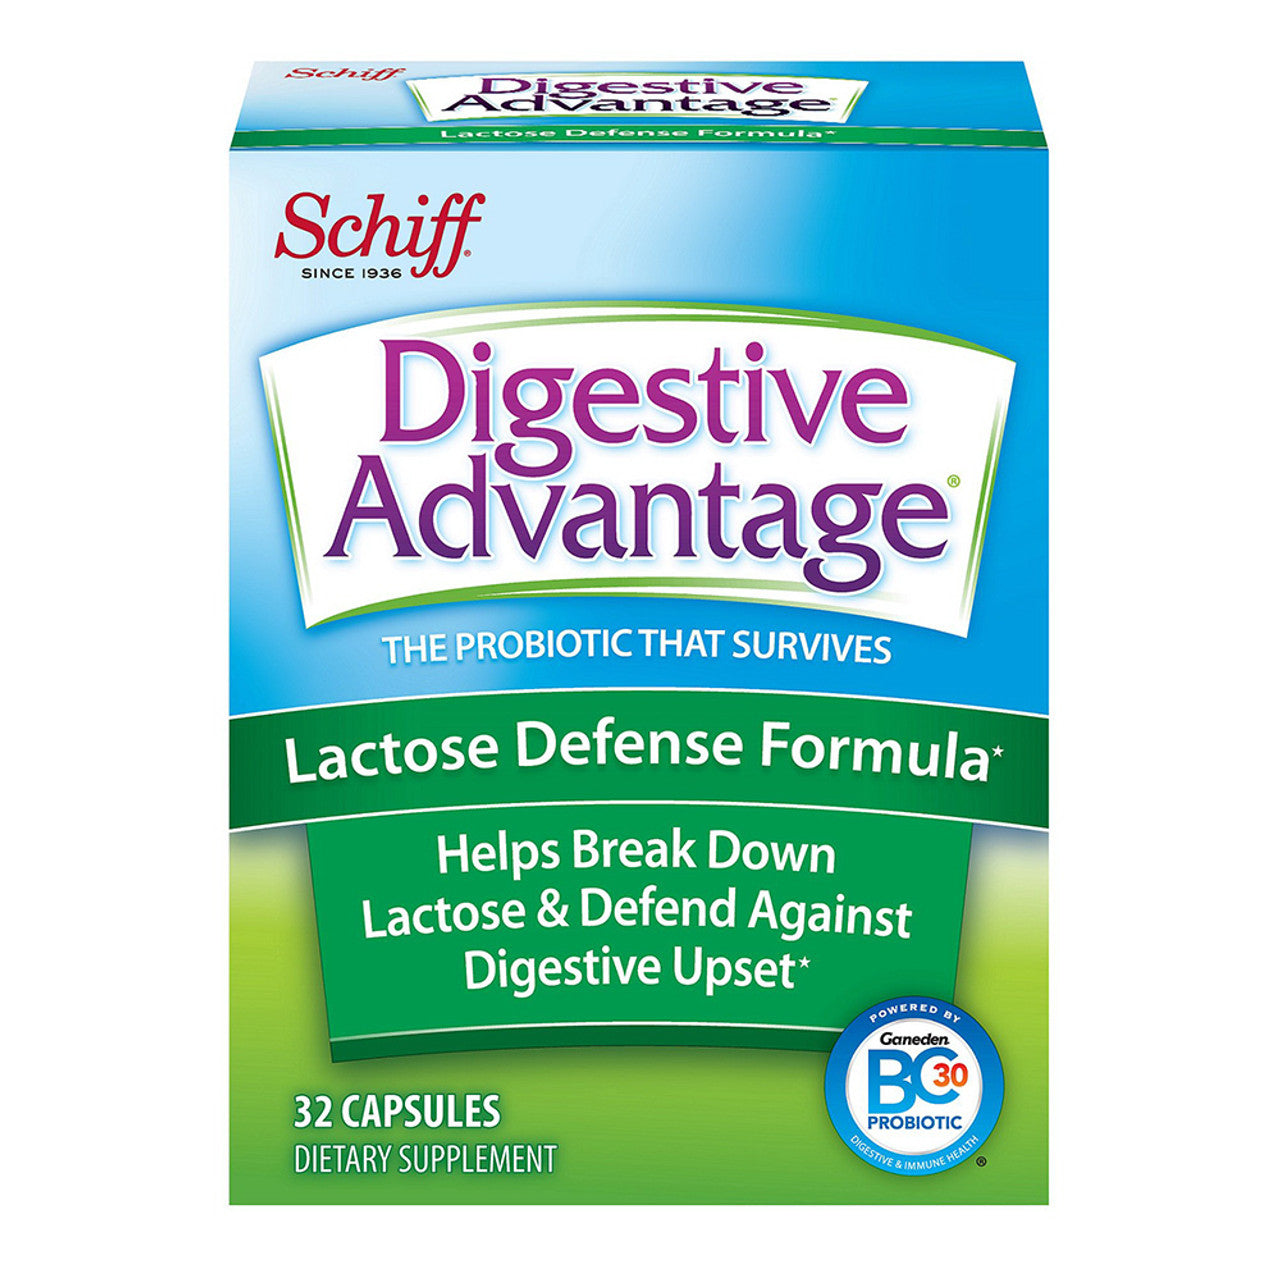 Schiff Digestive Advantage Daily Probiotics and Lactose Support Capsules, 32 Ea